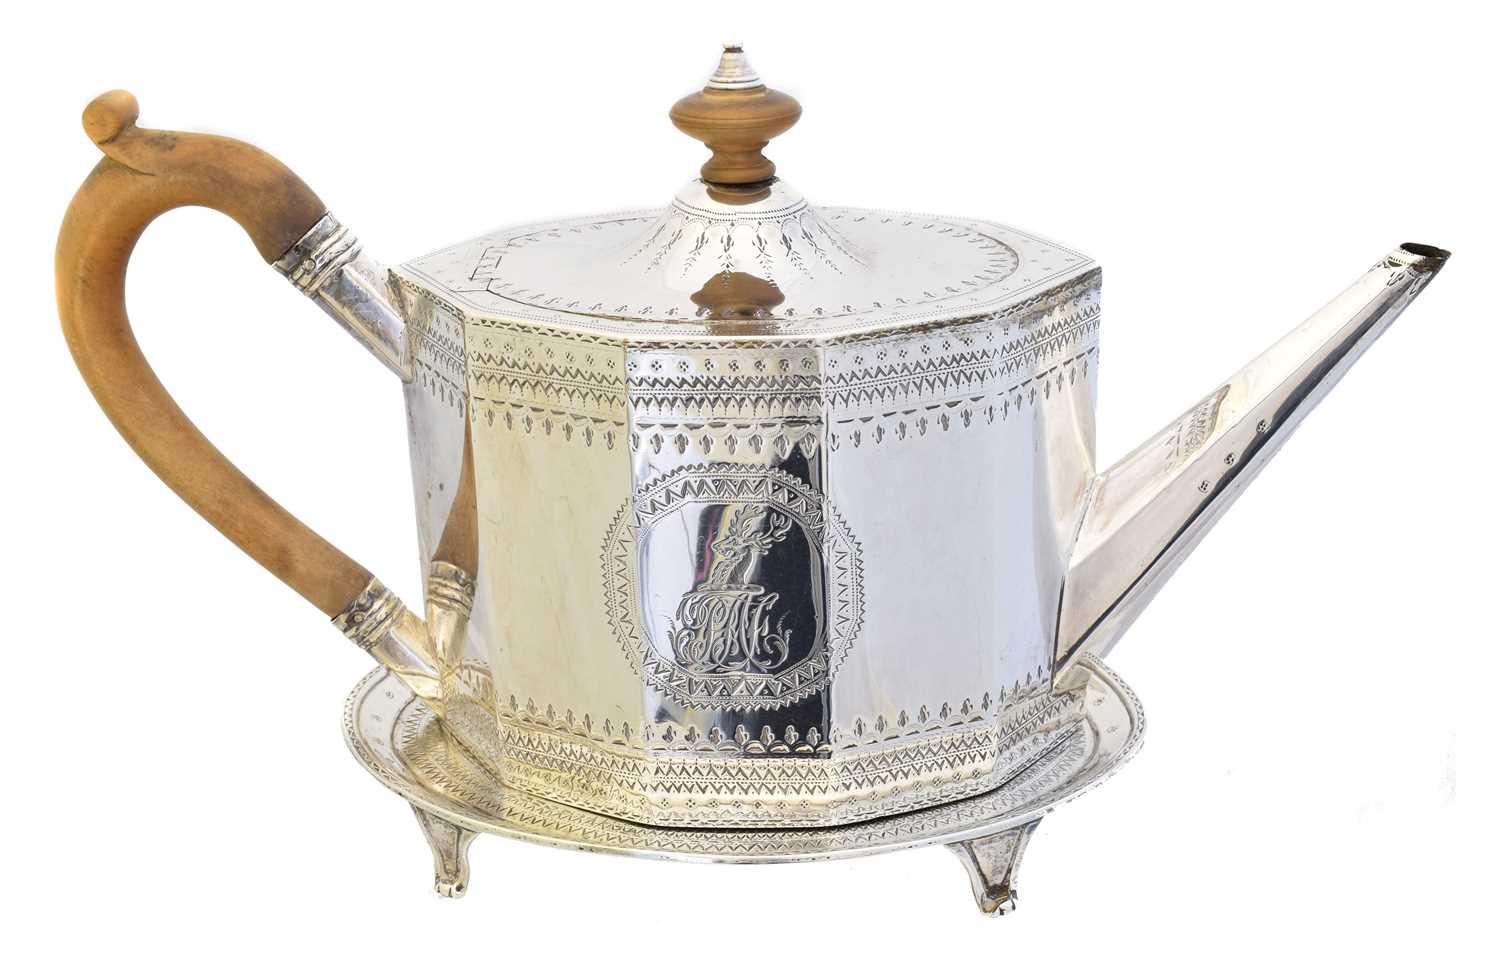 Lot 19 - A George III silver teapot on stand